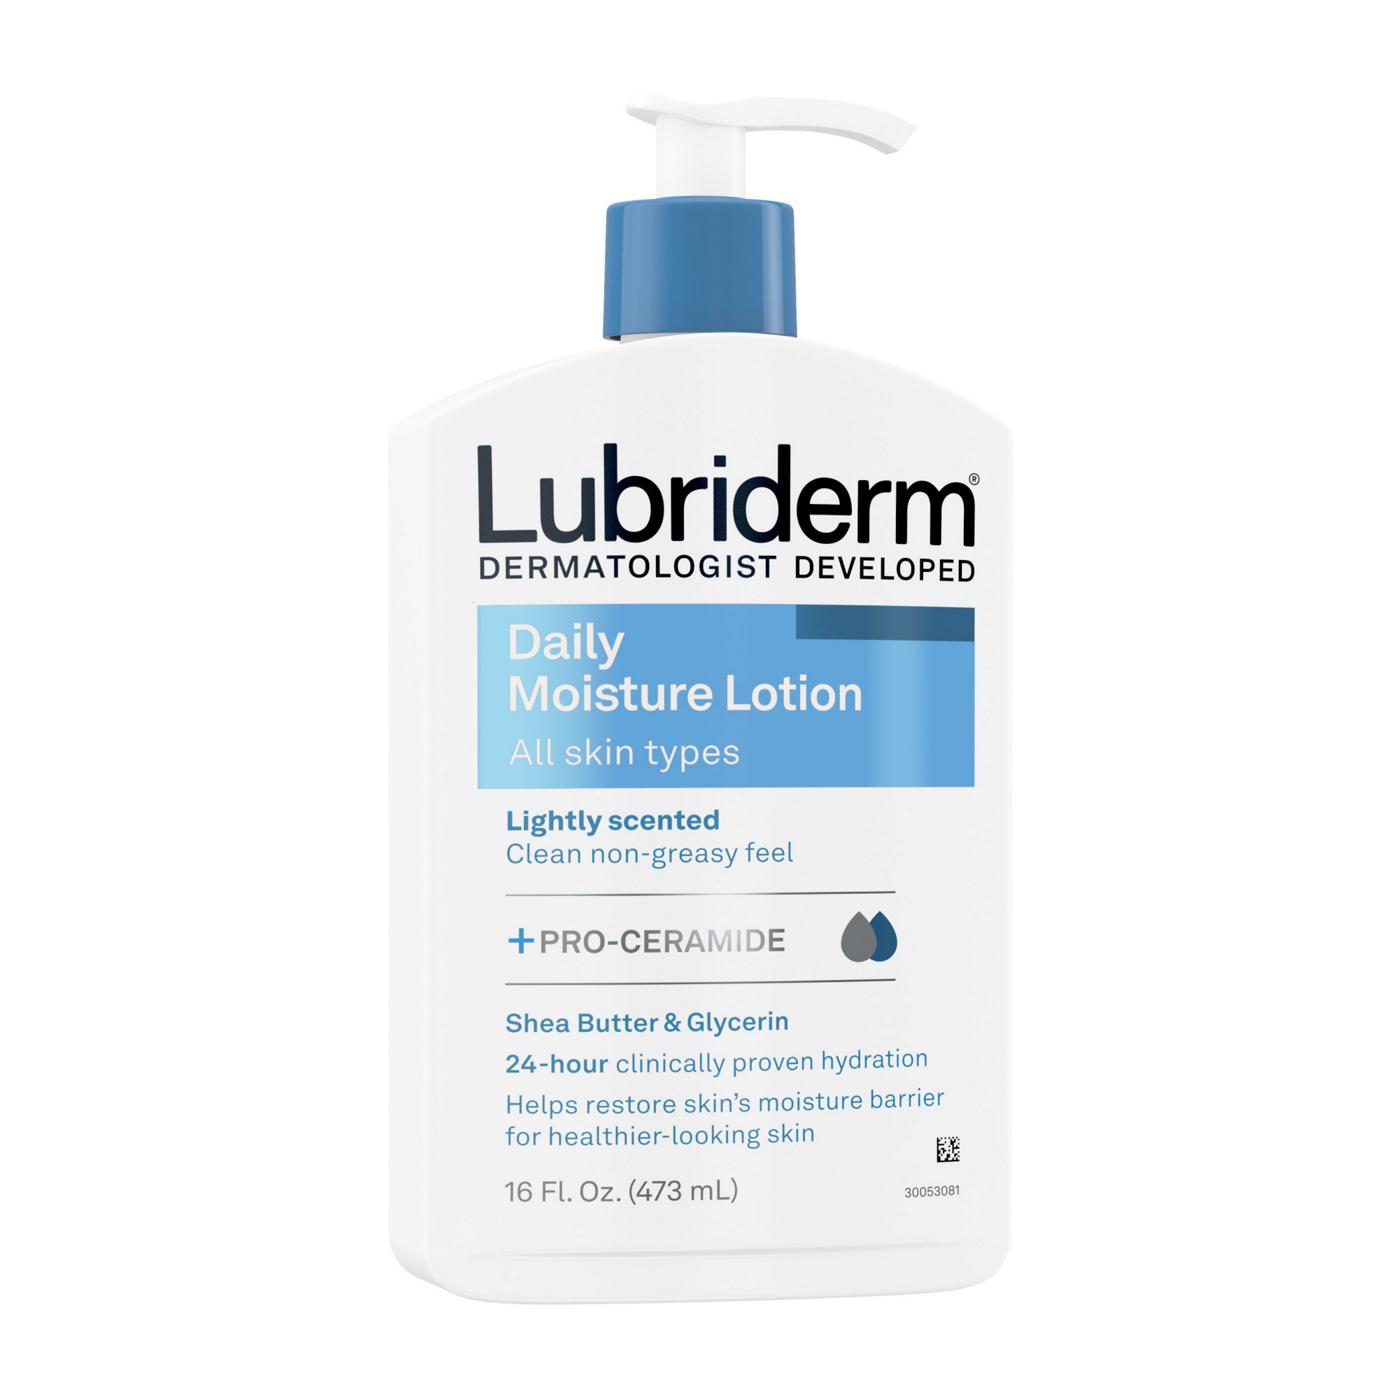 Lubriderm Daily Moisture Lotion; image 2 of 9